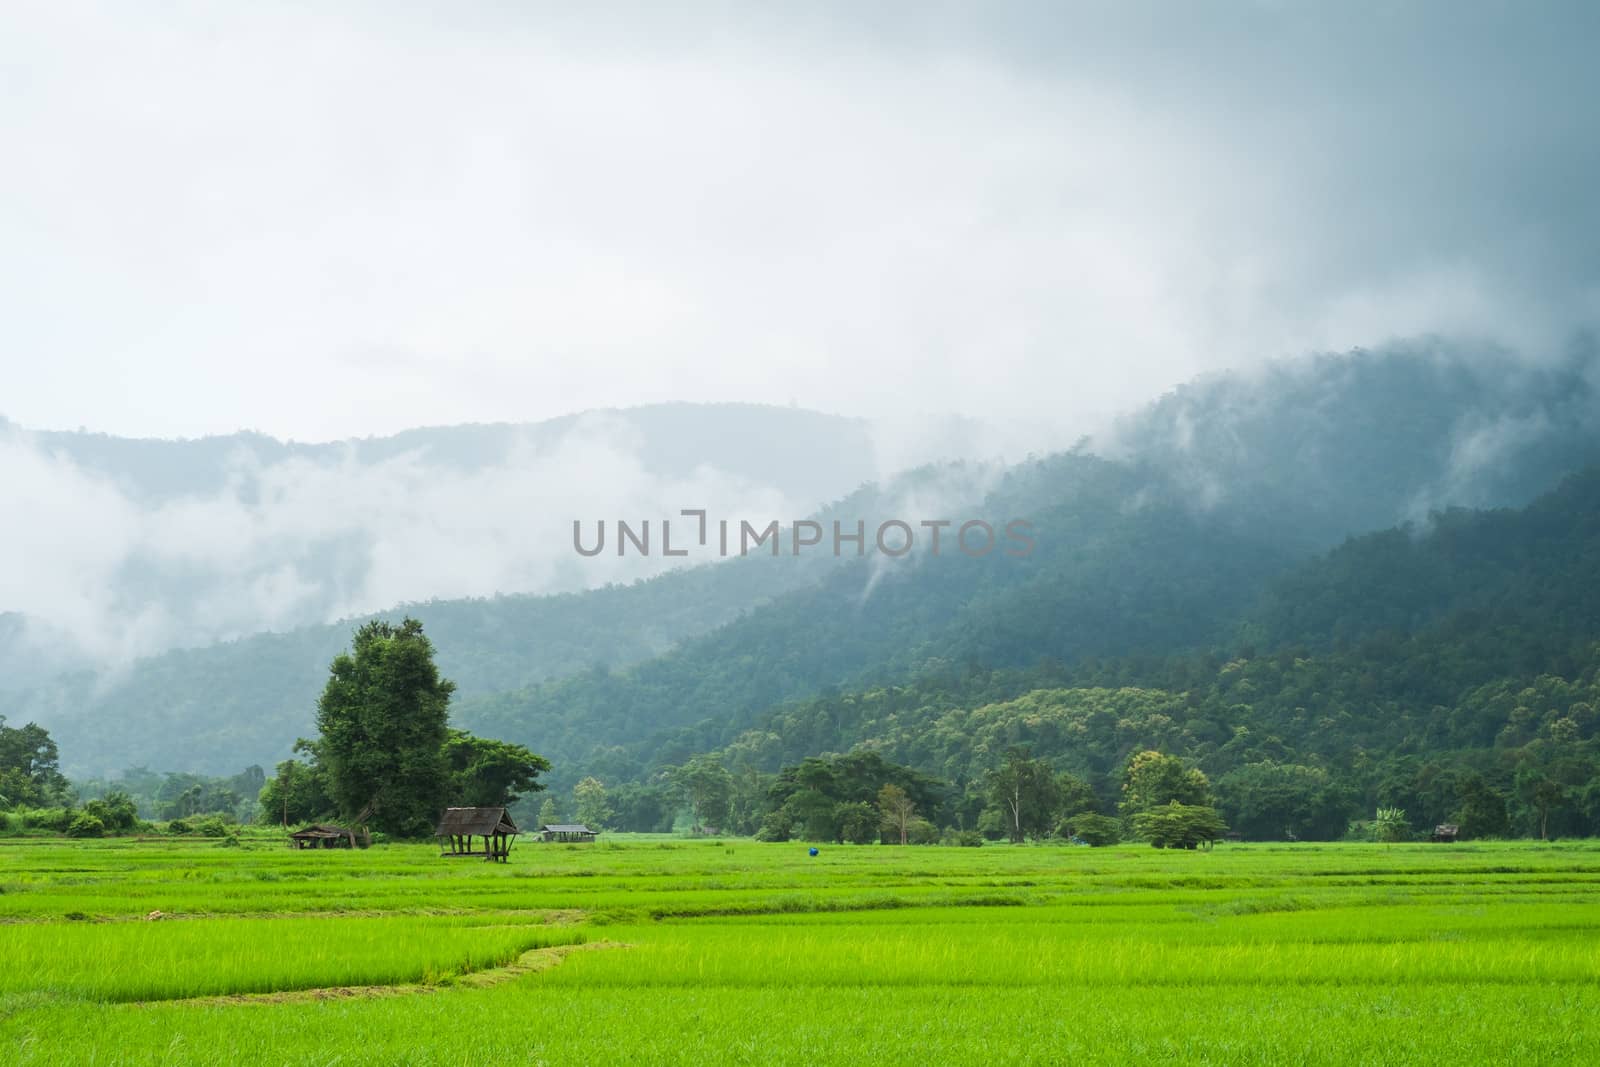 landscape of rice farm in thailand in raining day